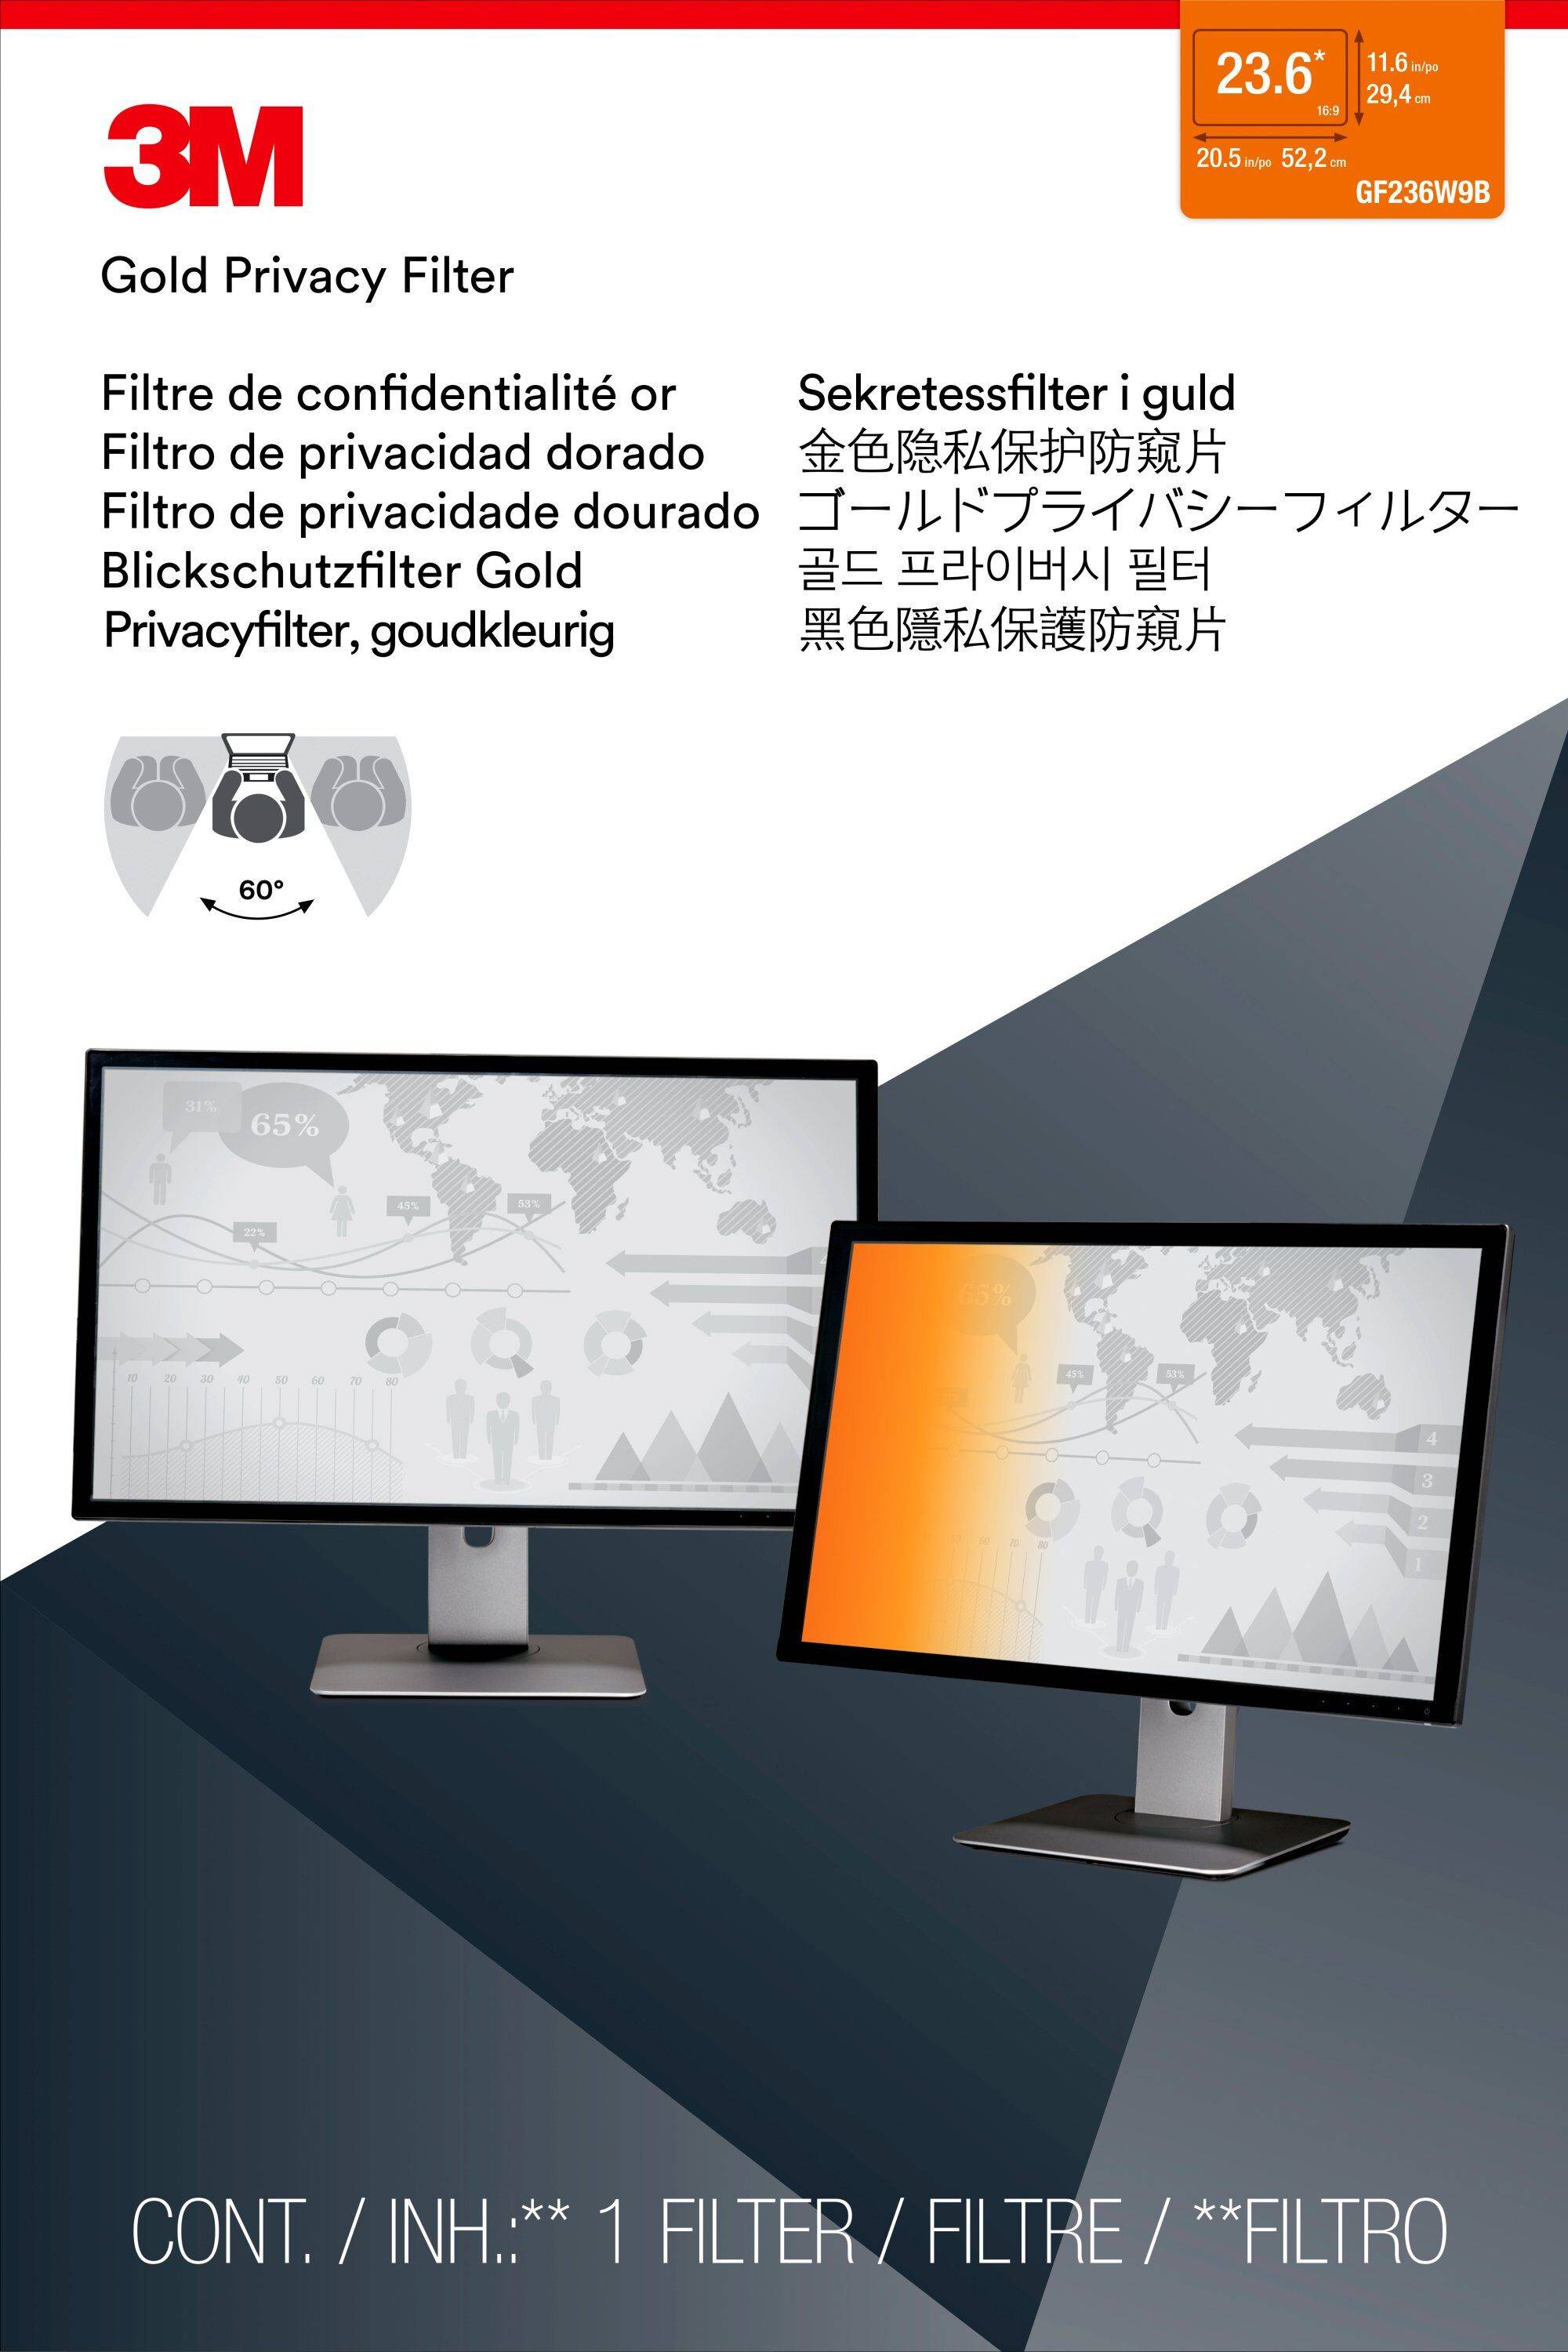 Rca Informatique - image du produit : GOLD PRIVACY FILTER FOR 23.6IN WIDESCREEN MONITOR